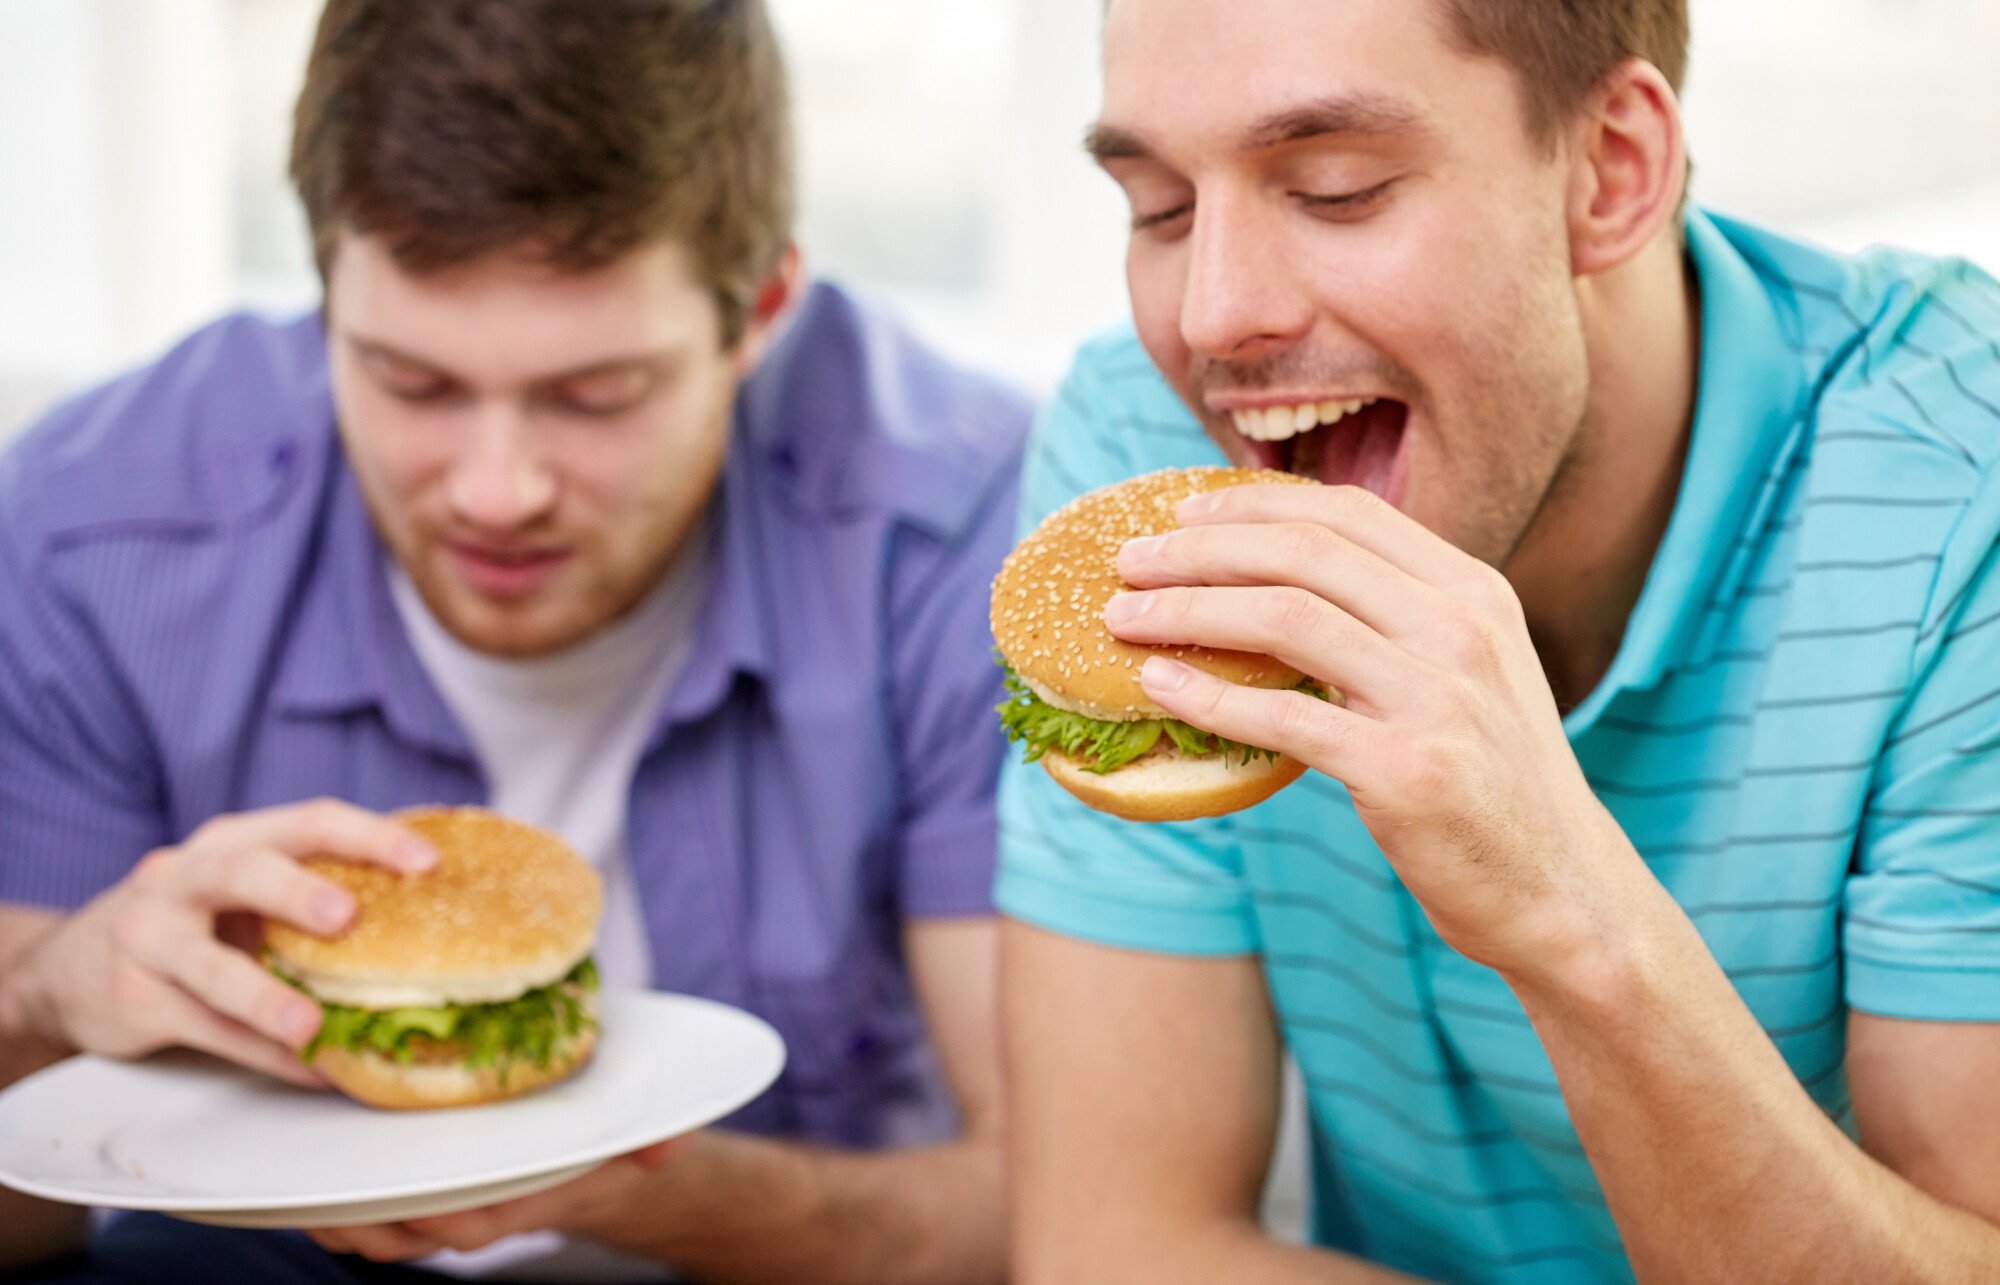 Two people eating burgers